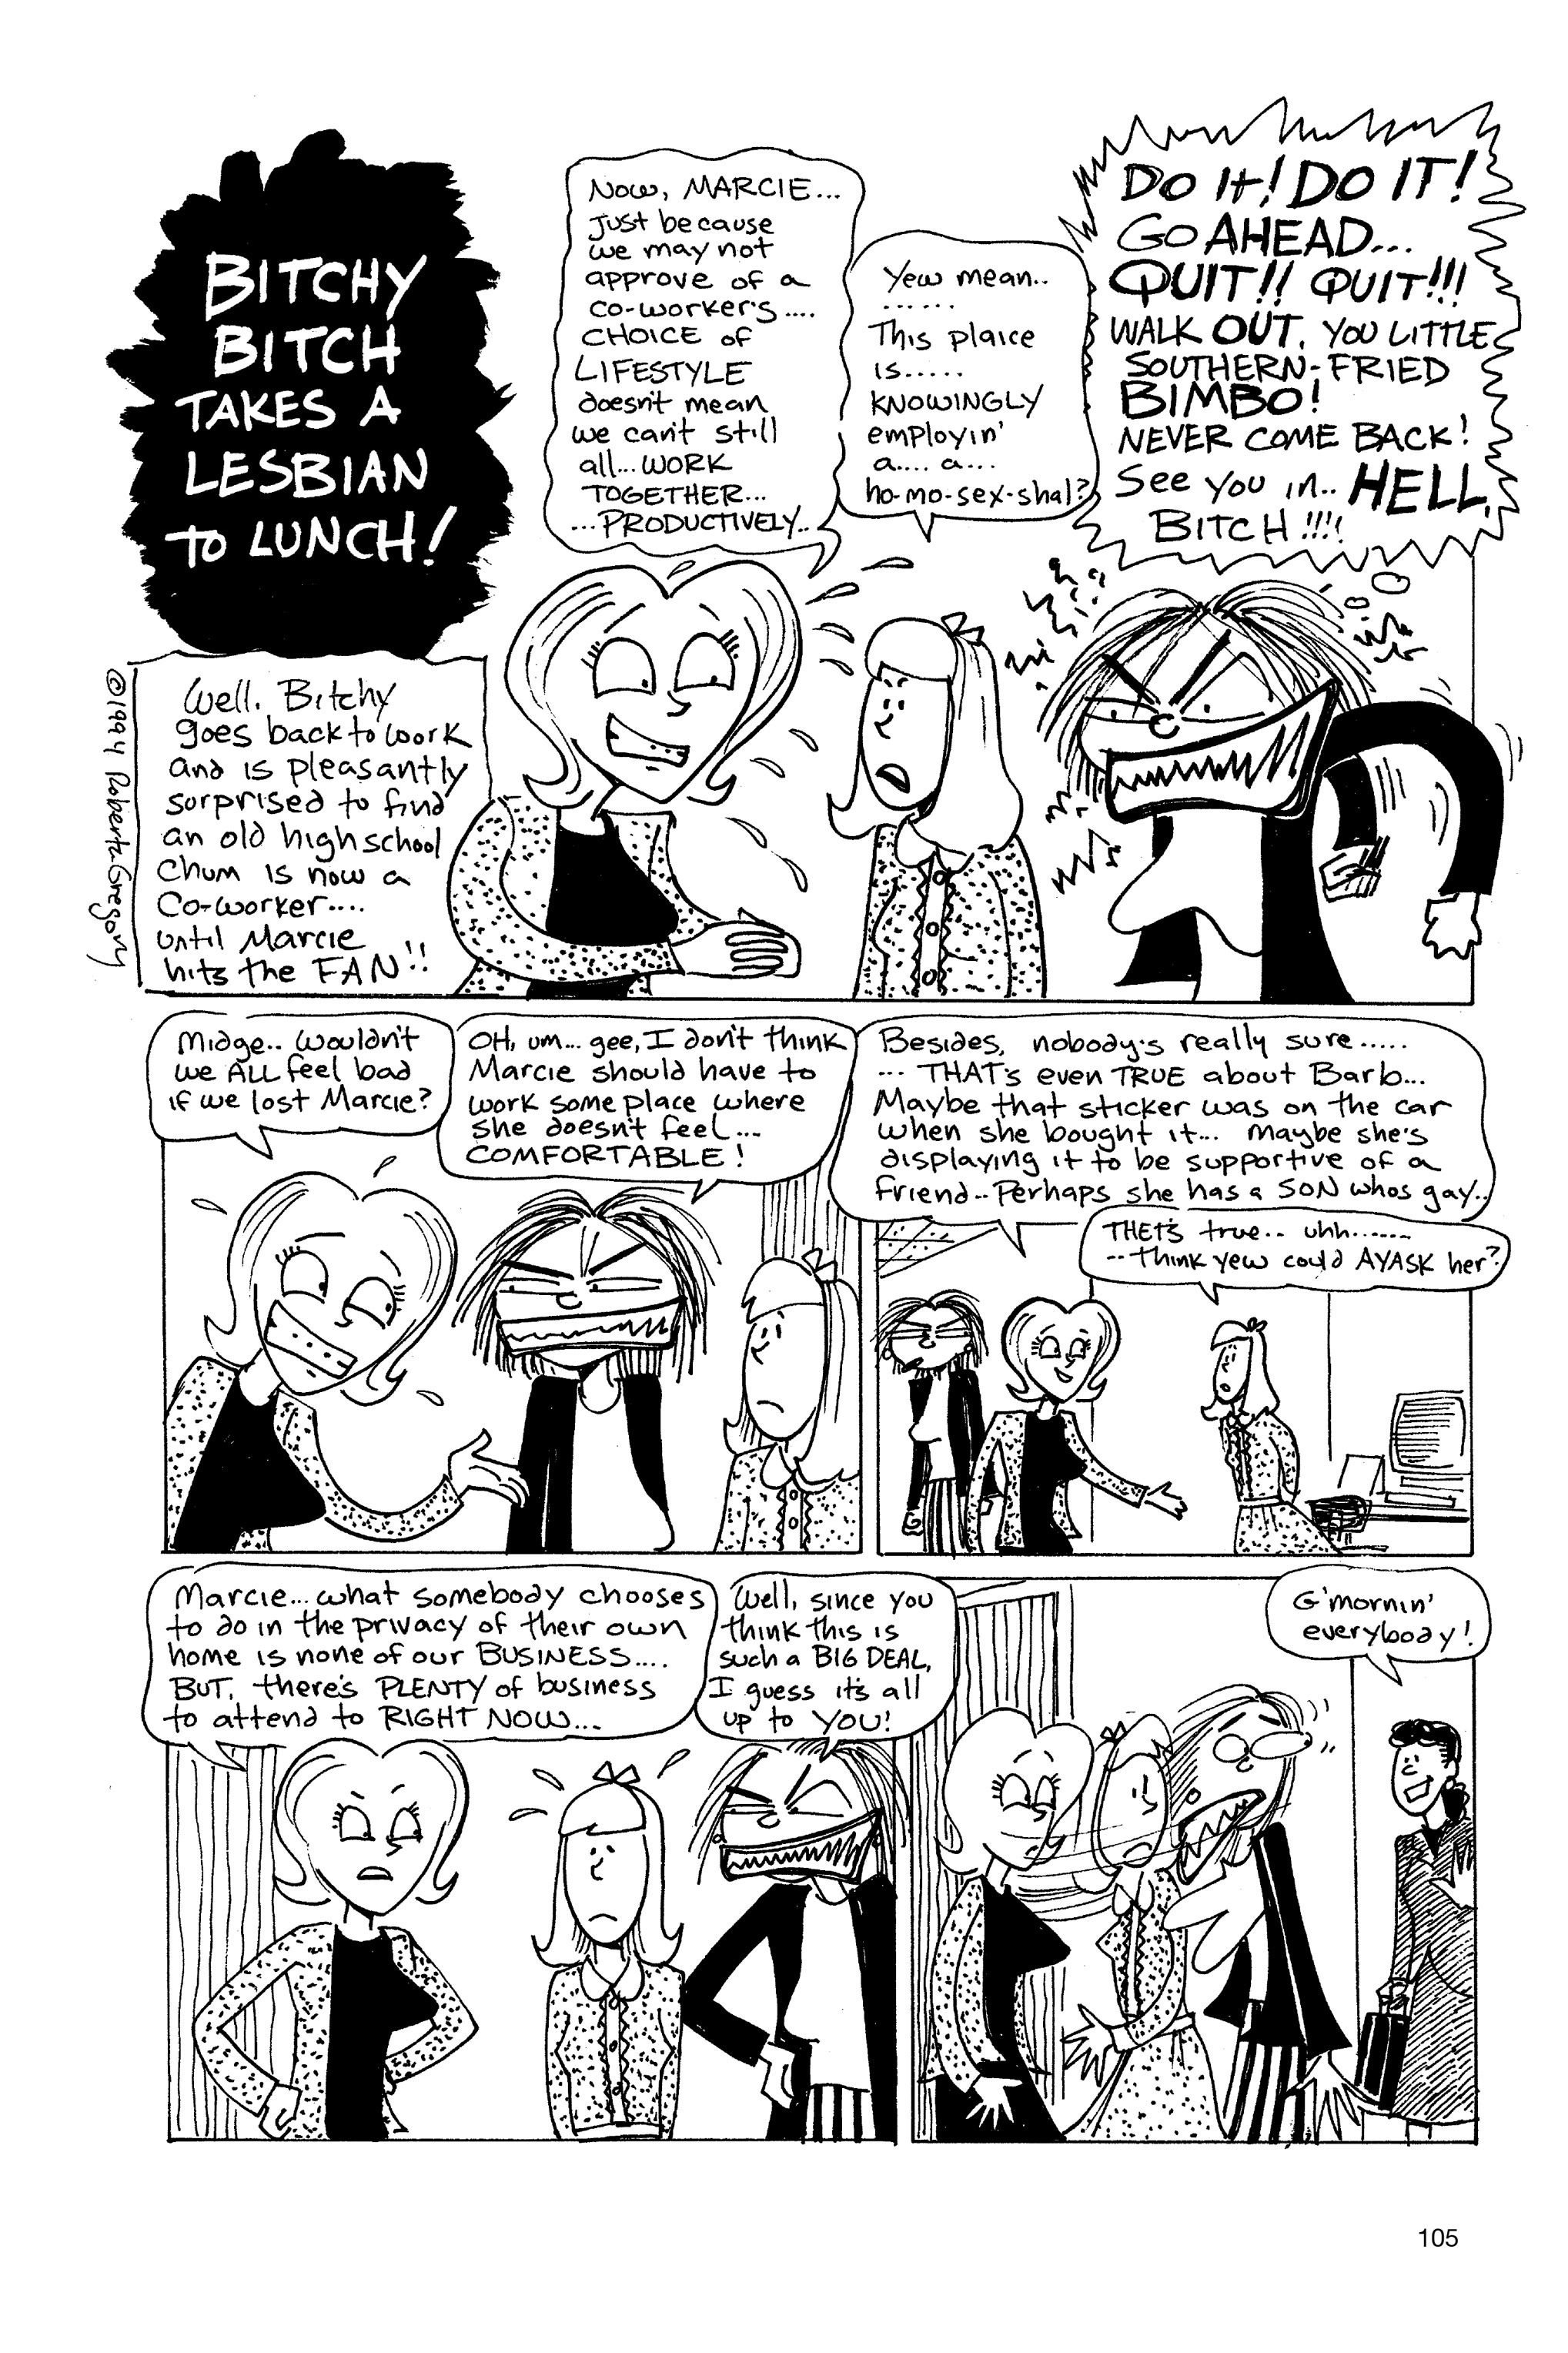 Read online Life's a Bitch: The Complete Bitchy Bitch Stories comic -  Issue # TPB (Part 2) - 3